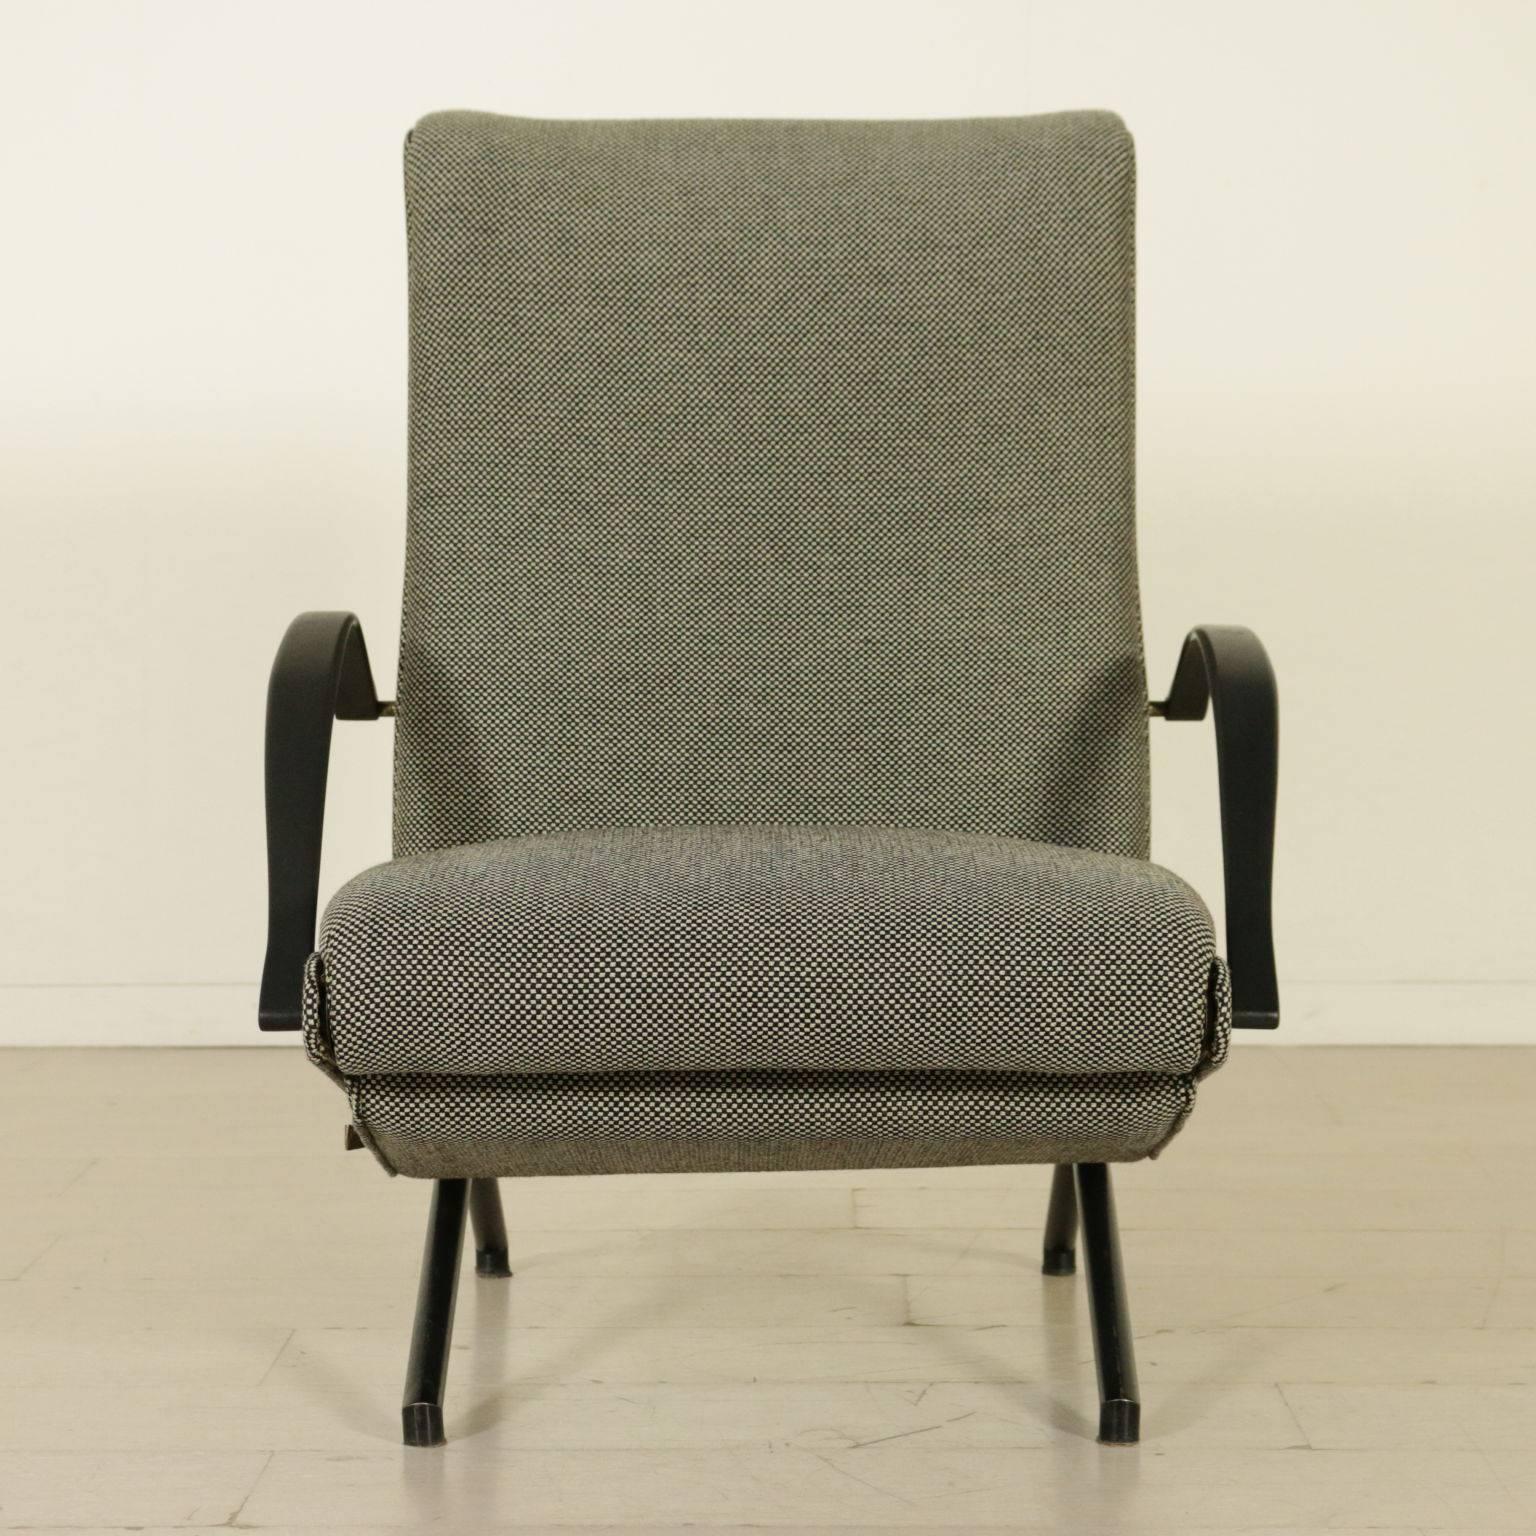 A first edition armchair designed by Osvaldo Borsani (1911-1985) for Tecno. Movable elements and flexible arms, metal structure, foam padding and fabric upholstery. Model: P40. Manufactured in Italy, 1950s.